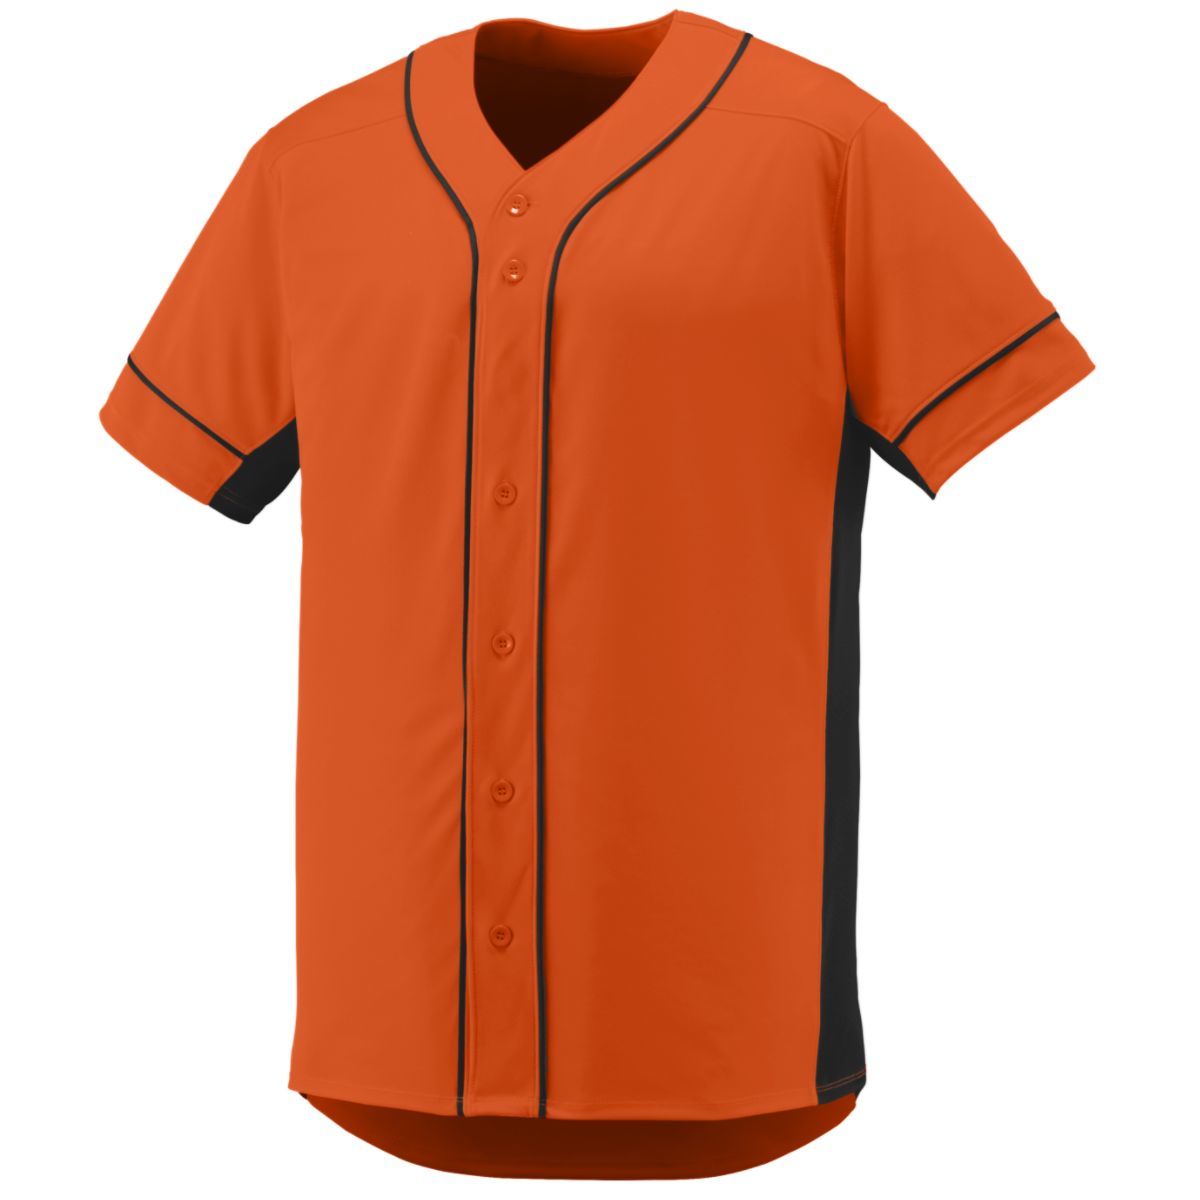 Augusta Sportswear Youth Slugger Jersey in Orange/Black  -Part of the Youth, Youth-Jersey, Augusta-Products, Baseball, Shirts, All-Sports, All-Sports-1 product lines at KanaleyCreations.com